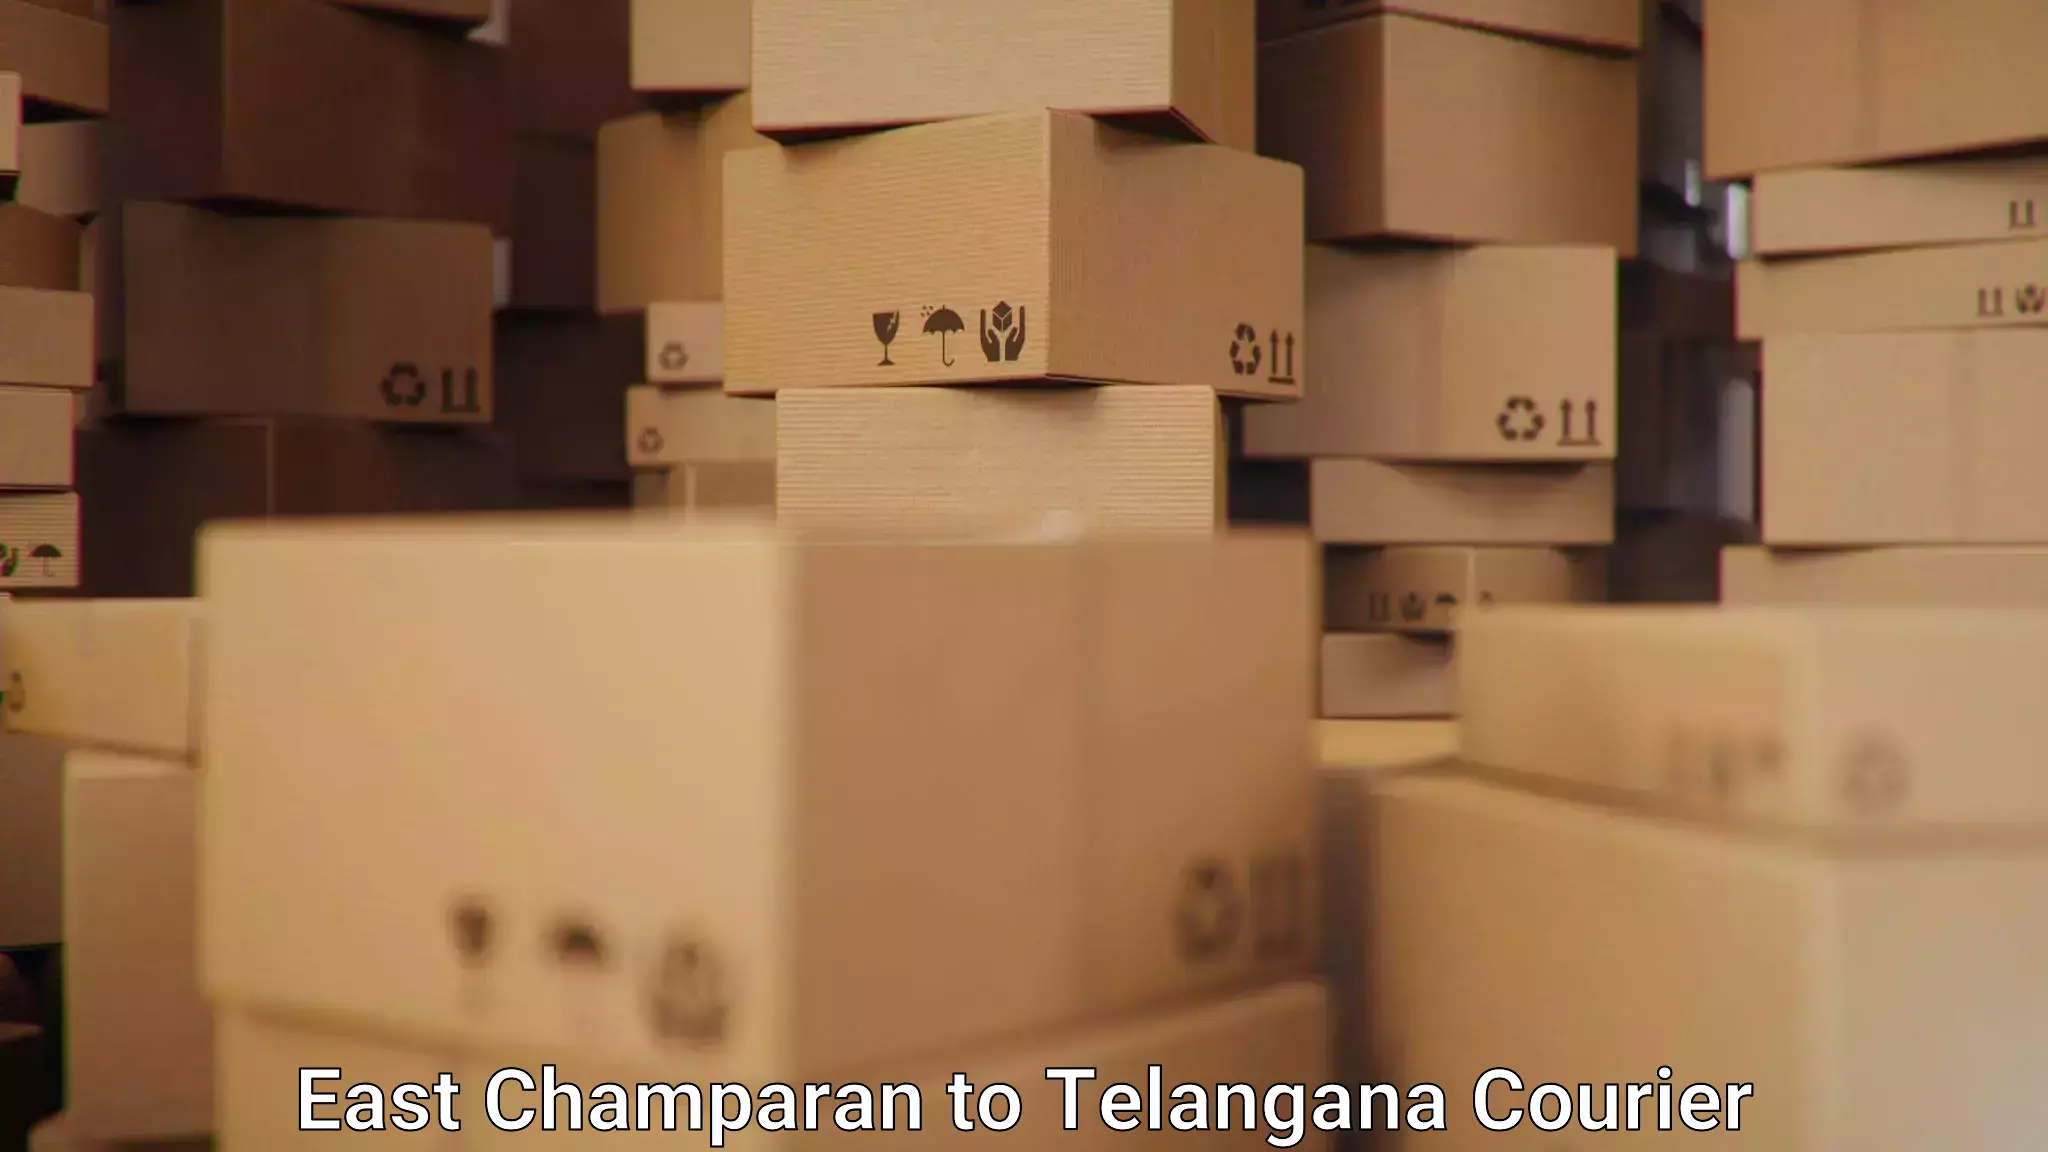 Speedy delivery service East Champaran to Telangana